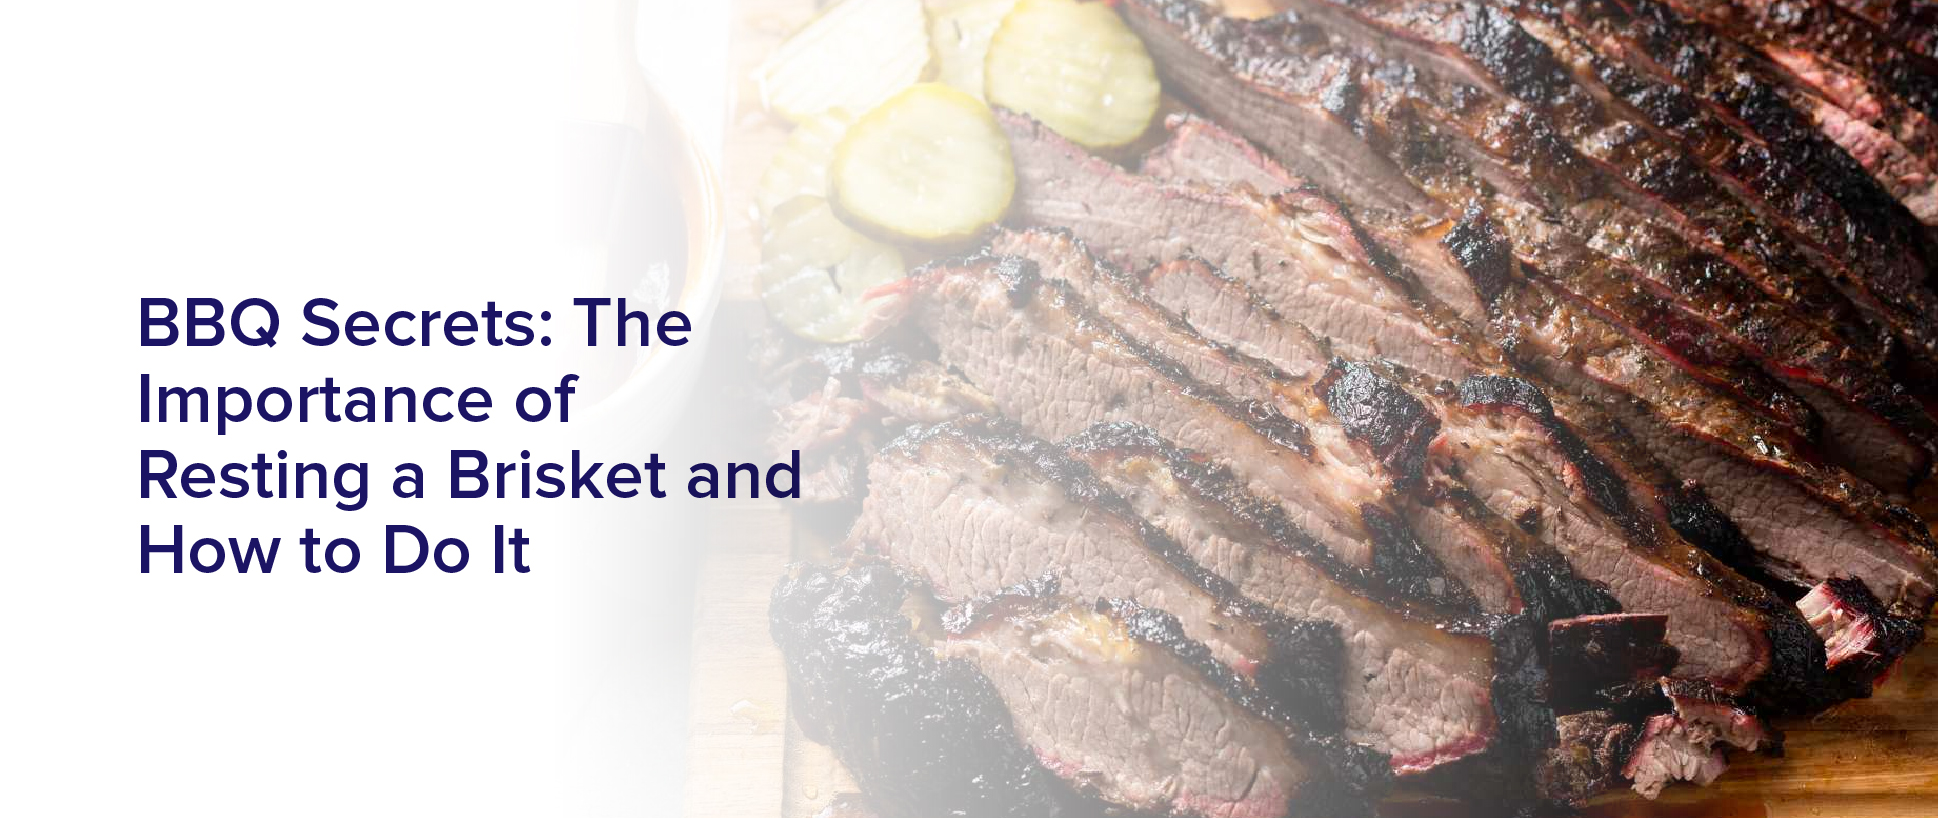 Bbq Secrets: The Importance Of Resting A Brisket And How To Do It”